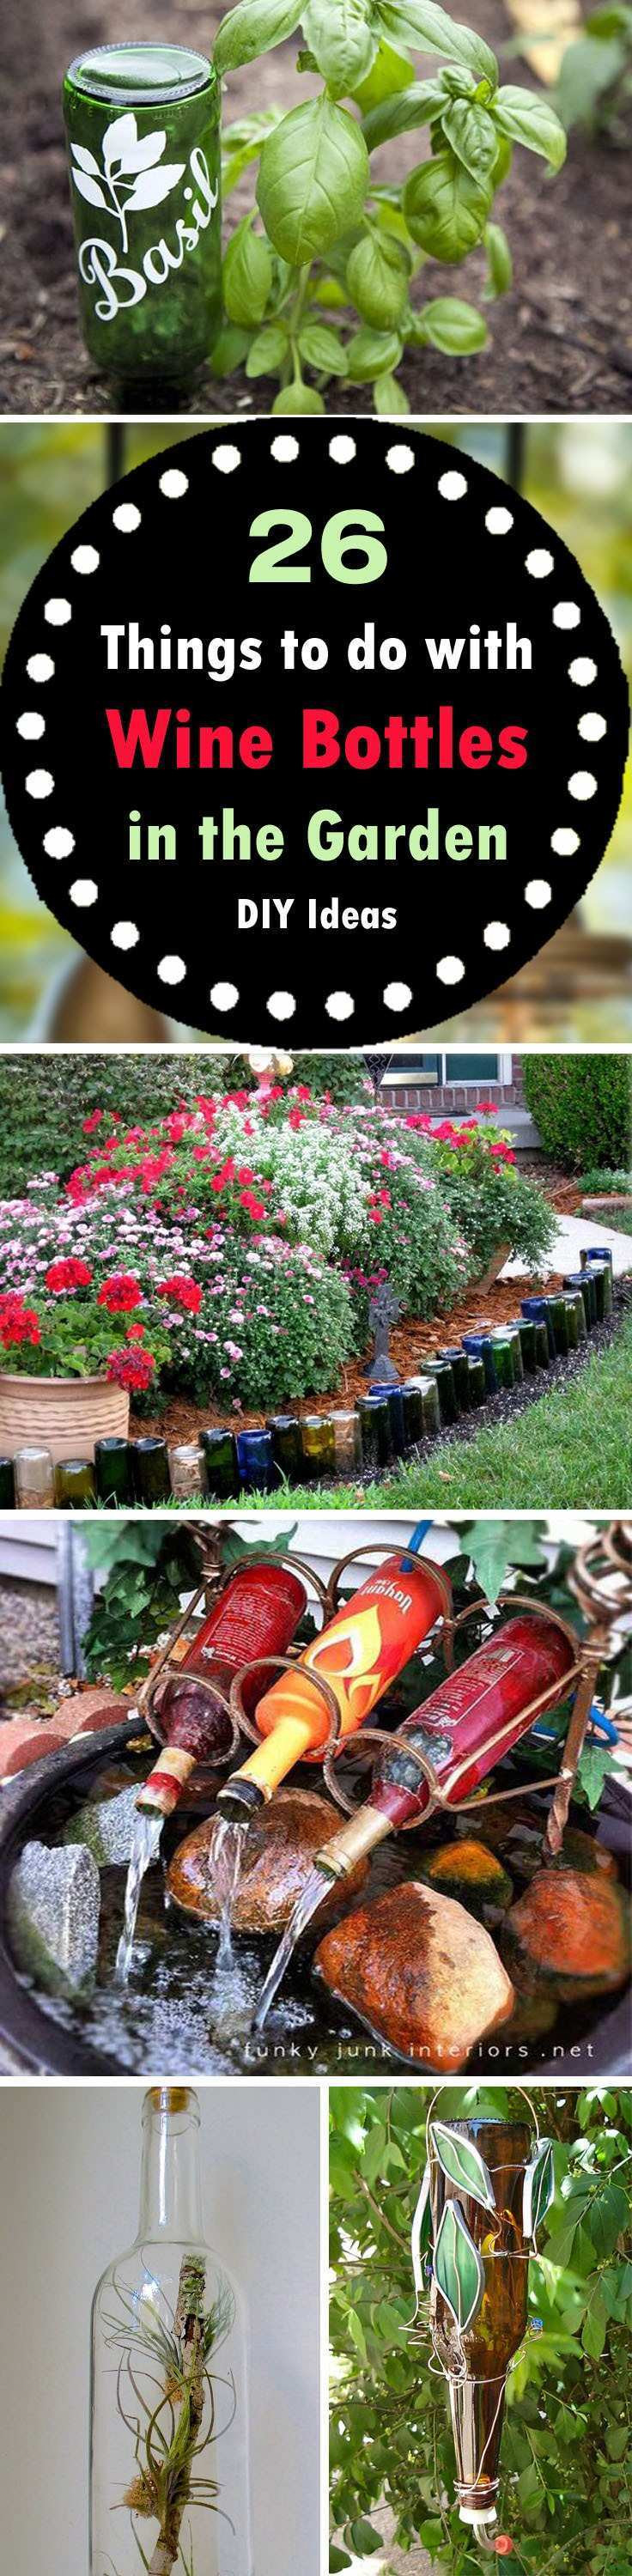 28 Spectacular Wine Bottle Vase 2024 free download wine bottle vase of build a planter box for vegetables luxury wooden wedding flowers h within build a planter box for vegetables new diy wine bottle ideas for the garden 26 wine